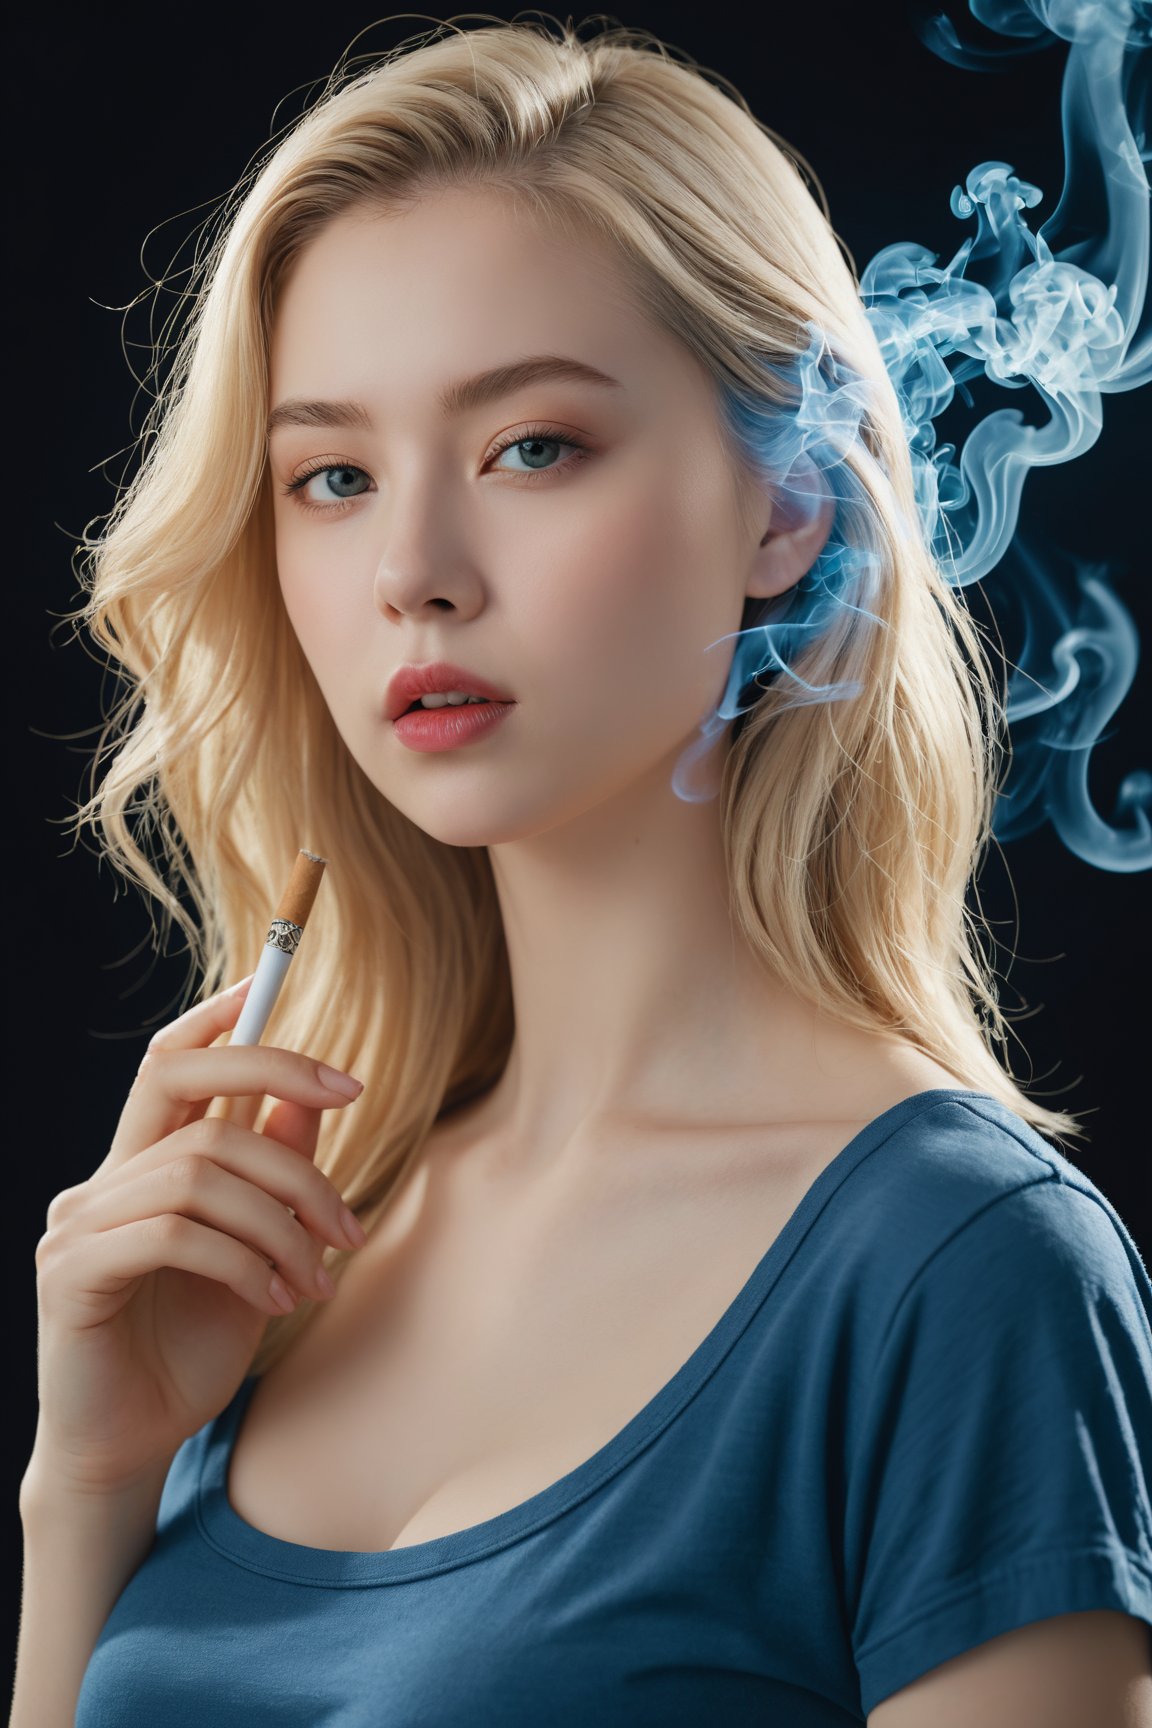 masterpiece, best quality, cinematic photo, anatomically correct, digital artwork illustration , innocent 20yo woman, smoking, pale skin, polish, pronounced feminine features, (stretching), t-shirt, straight blonde hair, large breasts, (cosmic background), dark illustration style, (8k, dynamic composition, photorealistic, sharp focus), elaborate background, cinematic, rule of thirds, backlight, film grain, intricate details, fine details,
